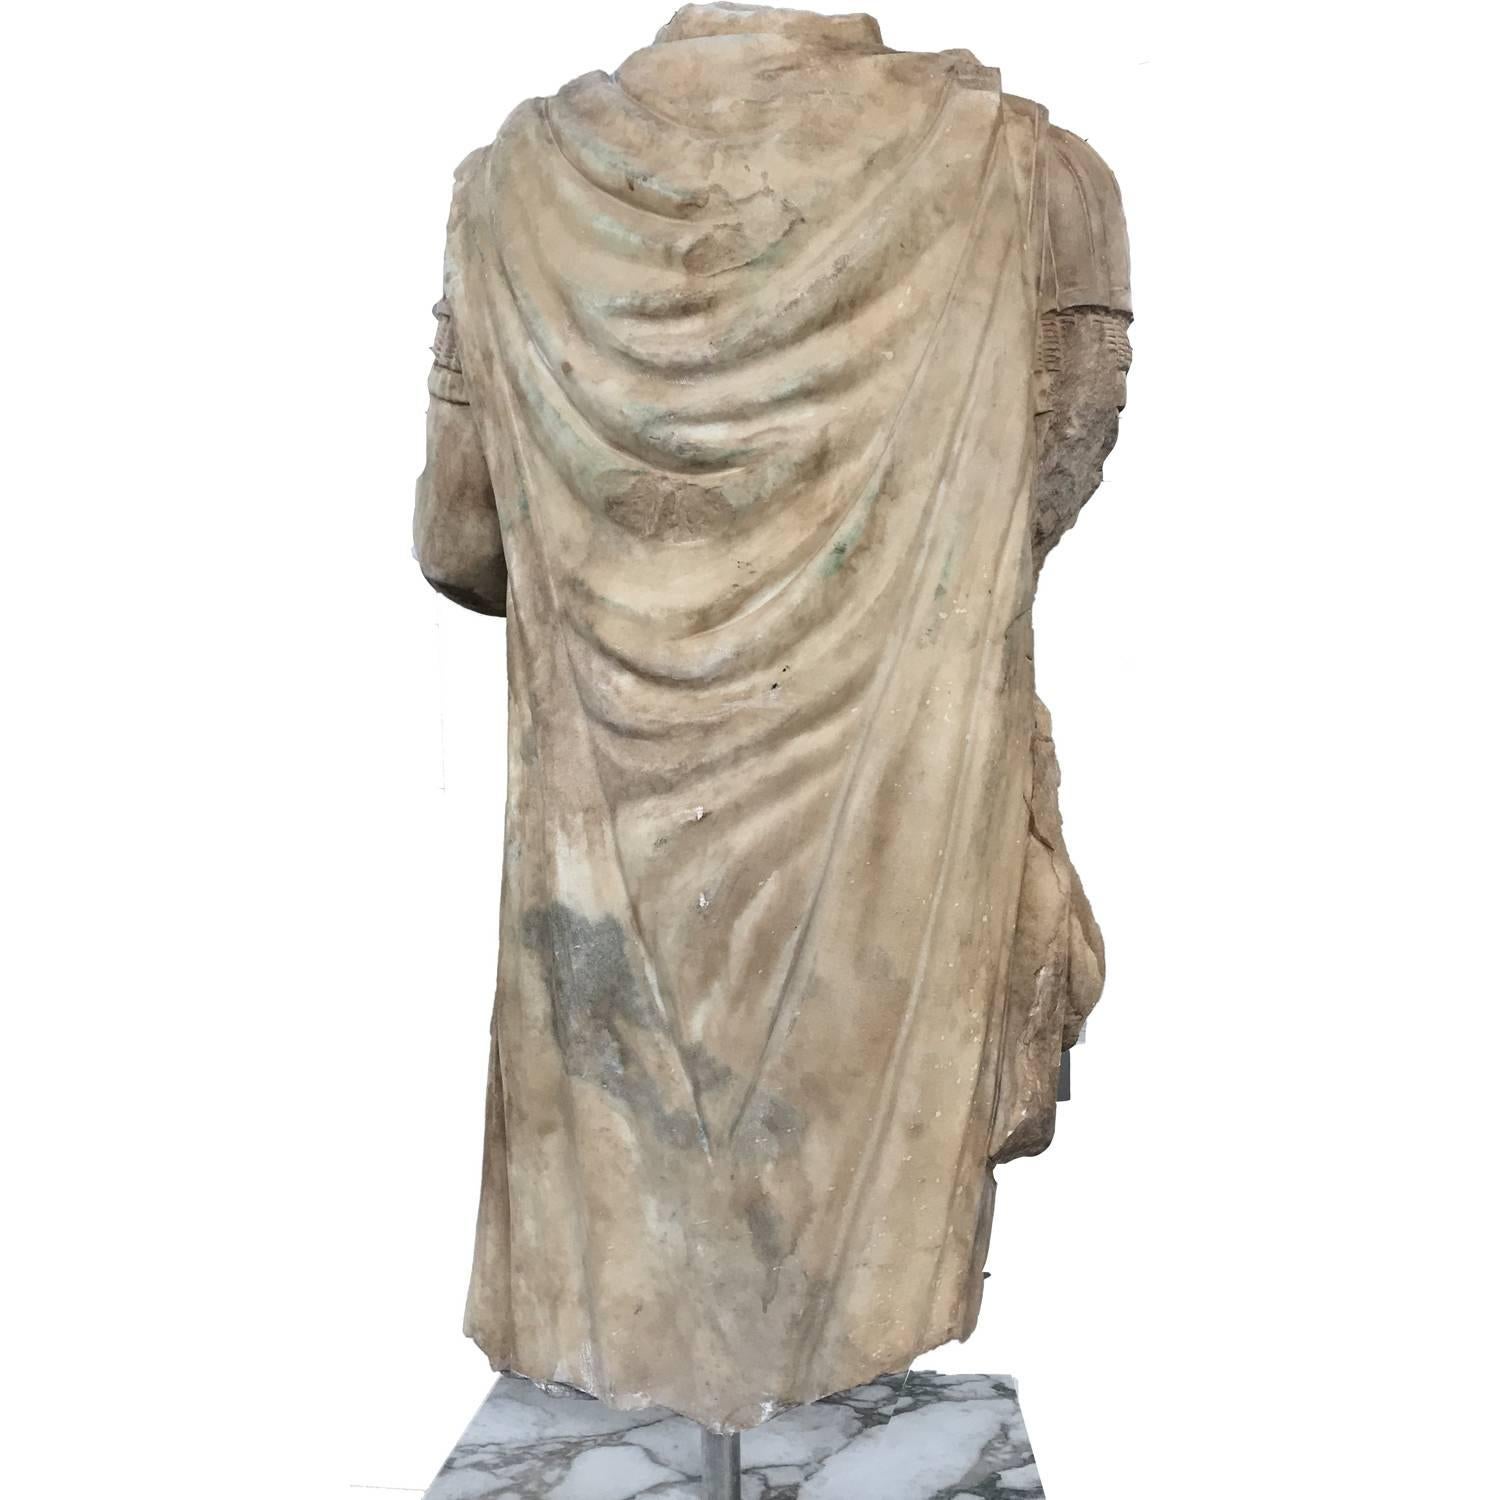 Stunning classical statue of Emperor Hadrian, headless, made as a torso as a replica as from the Archeological style. This torso is a portrait of the emperor Hadrian with his armor and is aged to give the same soul and character of an ancient one